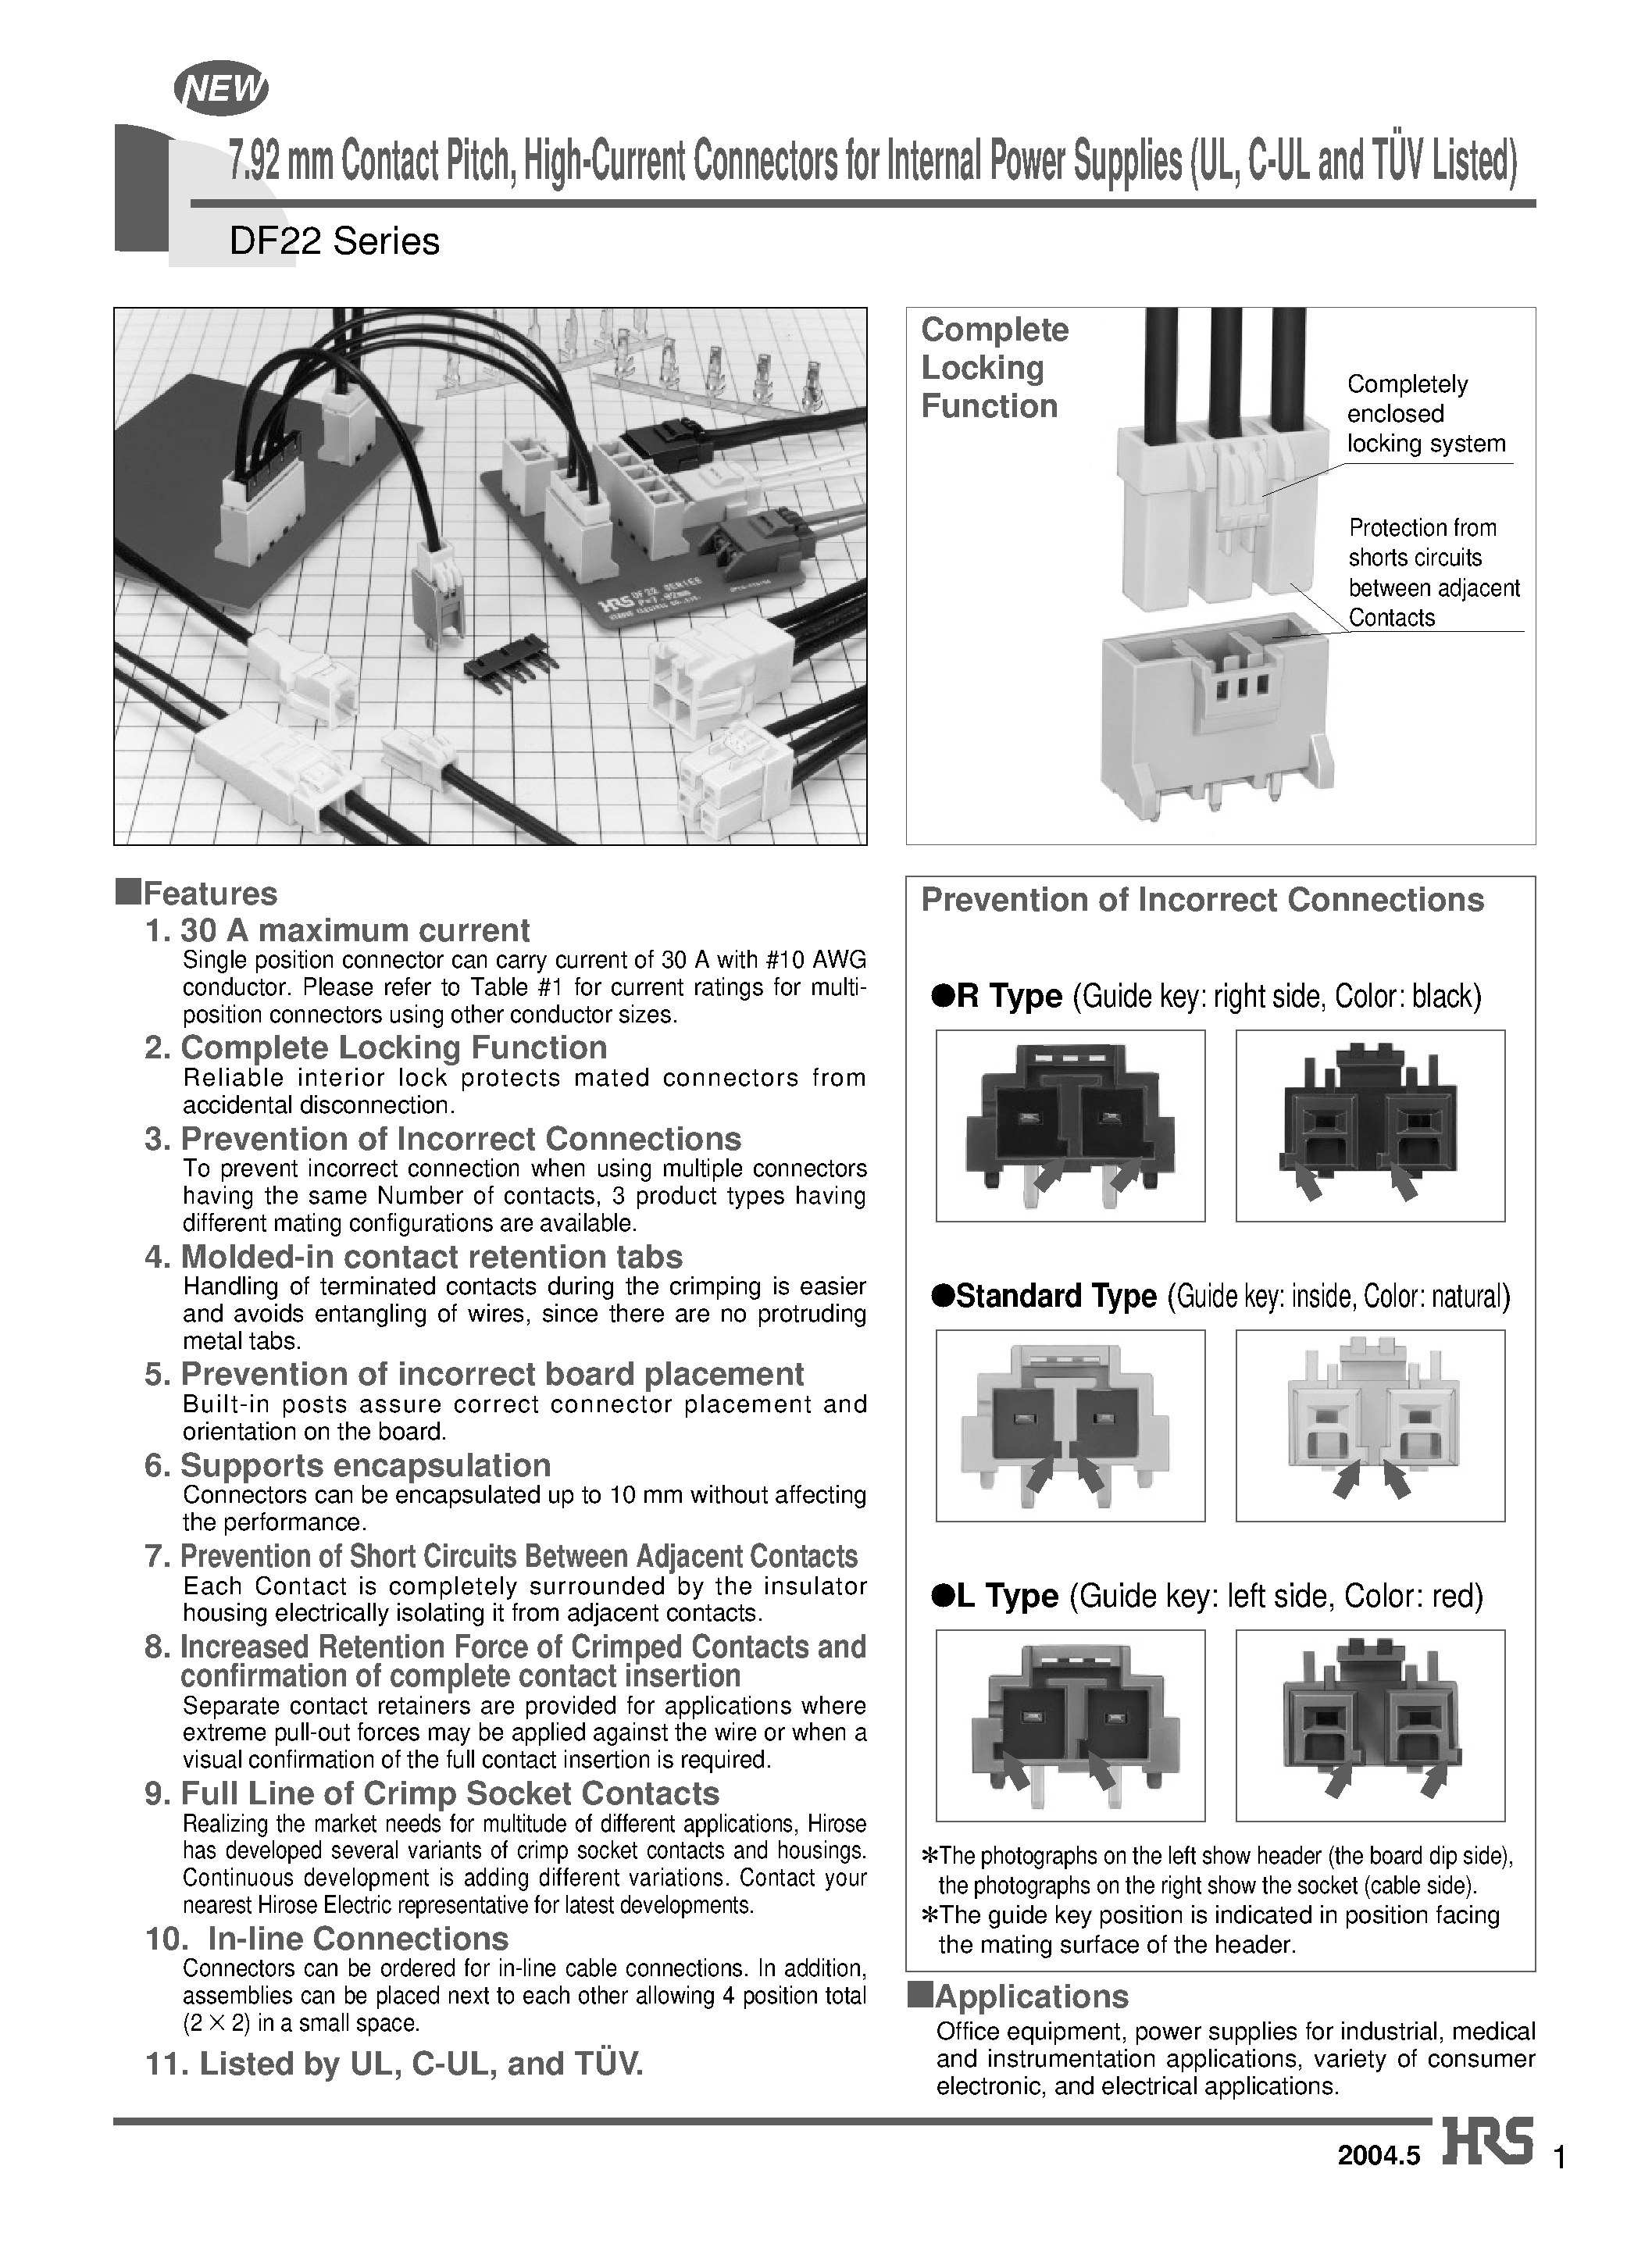 Даташит DF22AL-3S-7.92DS - 7.92 mm Contact Pitch/ High-Current Connectors for Internal Power Supplies (UL/ C-UL and TUV Listed) страница 1